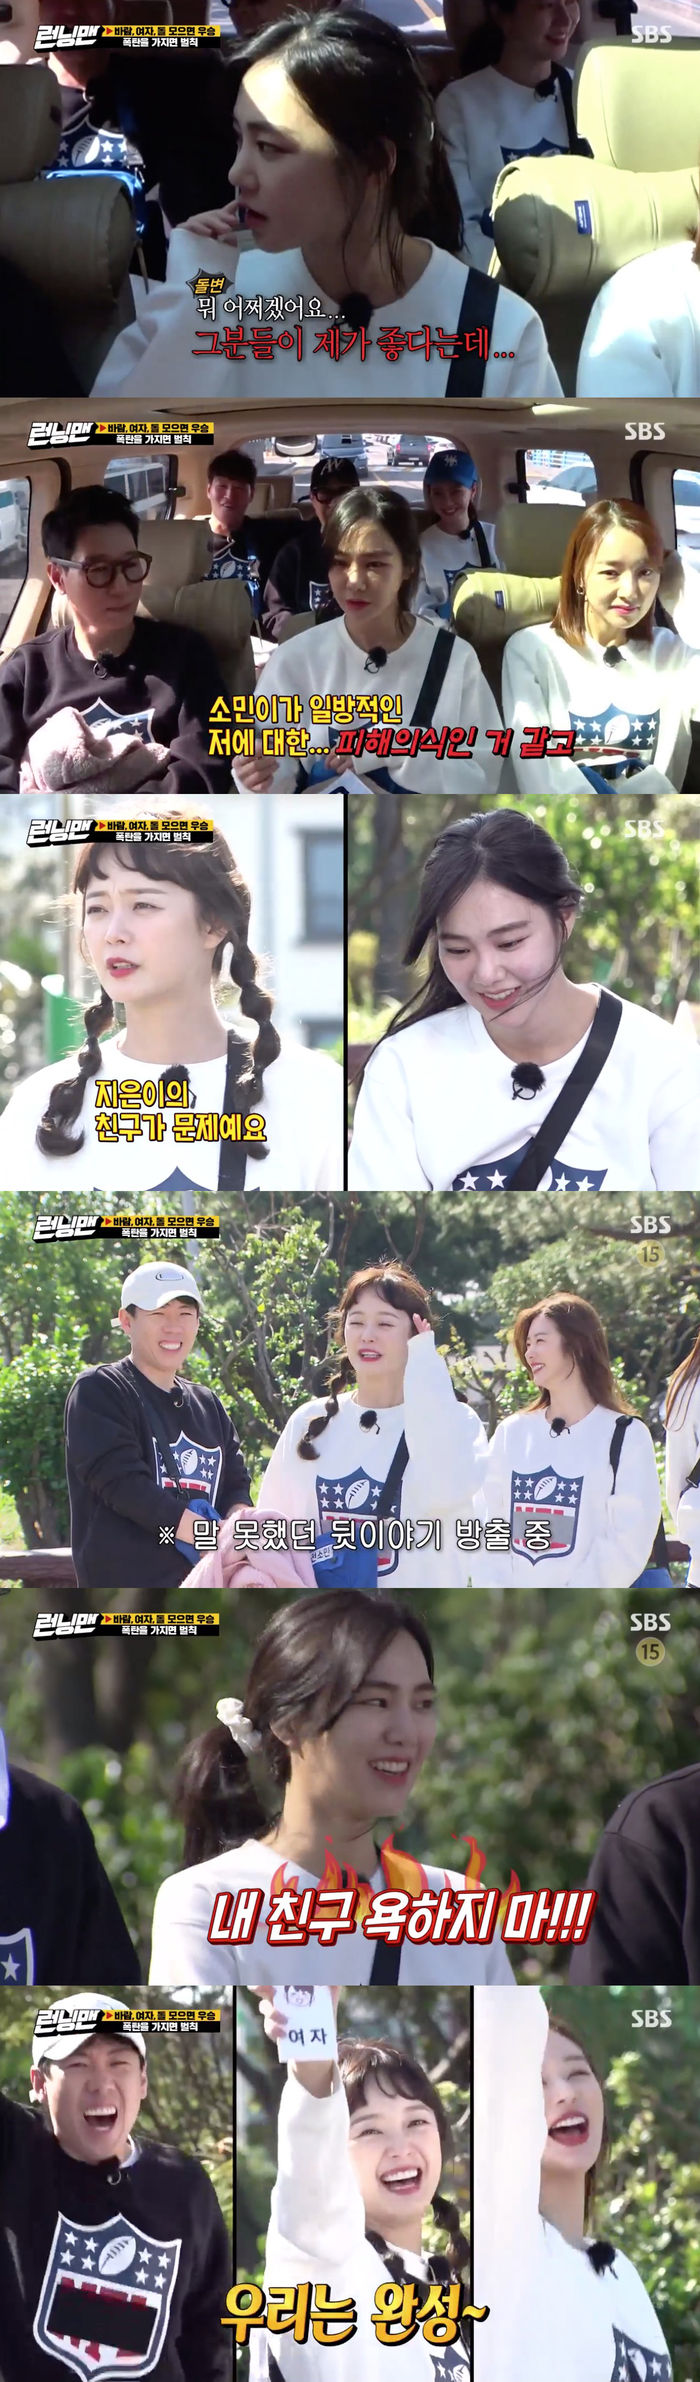 Han Ji-eun hits stone fastball on Jeon So-minOn SBS Running Man broadcasted on the 1st, Jeju Island was featured with several guests.On this day, actor Han Ji-eun attracted attention with his special relationship with the University motivation, Jeon So-min.Jeon So-min said, I went to a meeting together, but I always had a feeling that I was going to get a lift and an after-sales.Also, Jeon So-min mentioned the past that can not be said, There was a little incident between the friend of Han Ji-eun and me.The members drove Han Ji-eun in the absence of Jeon So-min, who said, Lets talk about the story.Somin will talk about himself in the middle of the day. I was so glad to motivate you, I think theres something else, Han Ji-eun said, I told you he was dirty with me.The members then corrected, No, I said it wasnt clean.Han Ji-eun cleared his mind and said, Every time I had a meeting, my seniors told me who was going out with me and Somin always went out together. I am sorry if I was upset about that in the meeting.I did not mean to. But what do you do? They say so. Did I deliberately ask you to pick me? The members said, I may think that the citizen is a squirrel. Han Ji-eun surprised everyone by blowing a stone fastball saying, But it seems that the squirrel is a sense of damage to me unilaterally.And Han Ji-eun said, The sommin I remember is not something that happened with me, but something that is very close to me.There was a problem with men, but I was in the middle and the relationship became strange. After that, the members of Han Ji-eun and Jeon So-min, who met again, said, Why do not you two meet so much? I still think there is a lot of money.Han Ji-eun then said, I did what I told you to do because it was the first time.Yoo Jae-Suk said, I think that the owner of the shogunate has no other thing about you, but he said that you have a sense of damage.Then, Jeon So-min said, The paper is clean. The paper is Friend. The paper is Friend OO.Yoo Jae-Suk said, Lets talk about it when Planes passes here every four minutes. Jeon So-min mentioned the Friend name of Han Ji-eun at the moment Planes passed.Han Ji-eun then burst out and laughed, Dont swear my Friend.Meanwhile, Lee Joo-bin, who collected all the wind, women and stone cards, won the final victory on the day, and Han Ji-eun, who had a bomb card, received the penalty.Han Ji-eun, who collected all the cards in particular, missed the victory by pointing to a card replacement to a team that finished first and second in the final mission.Han Ji-eun said, Why do you take all our team? Did we do something wrong?